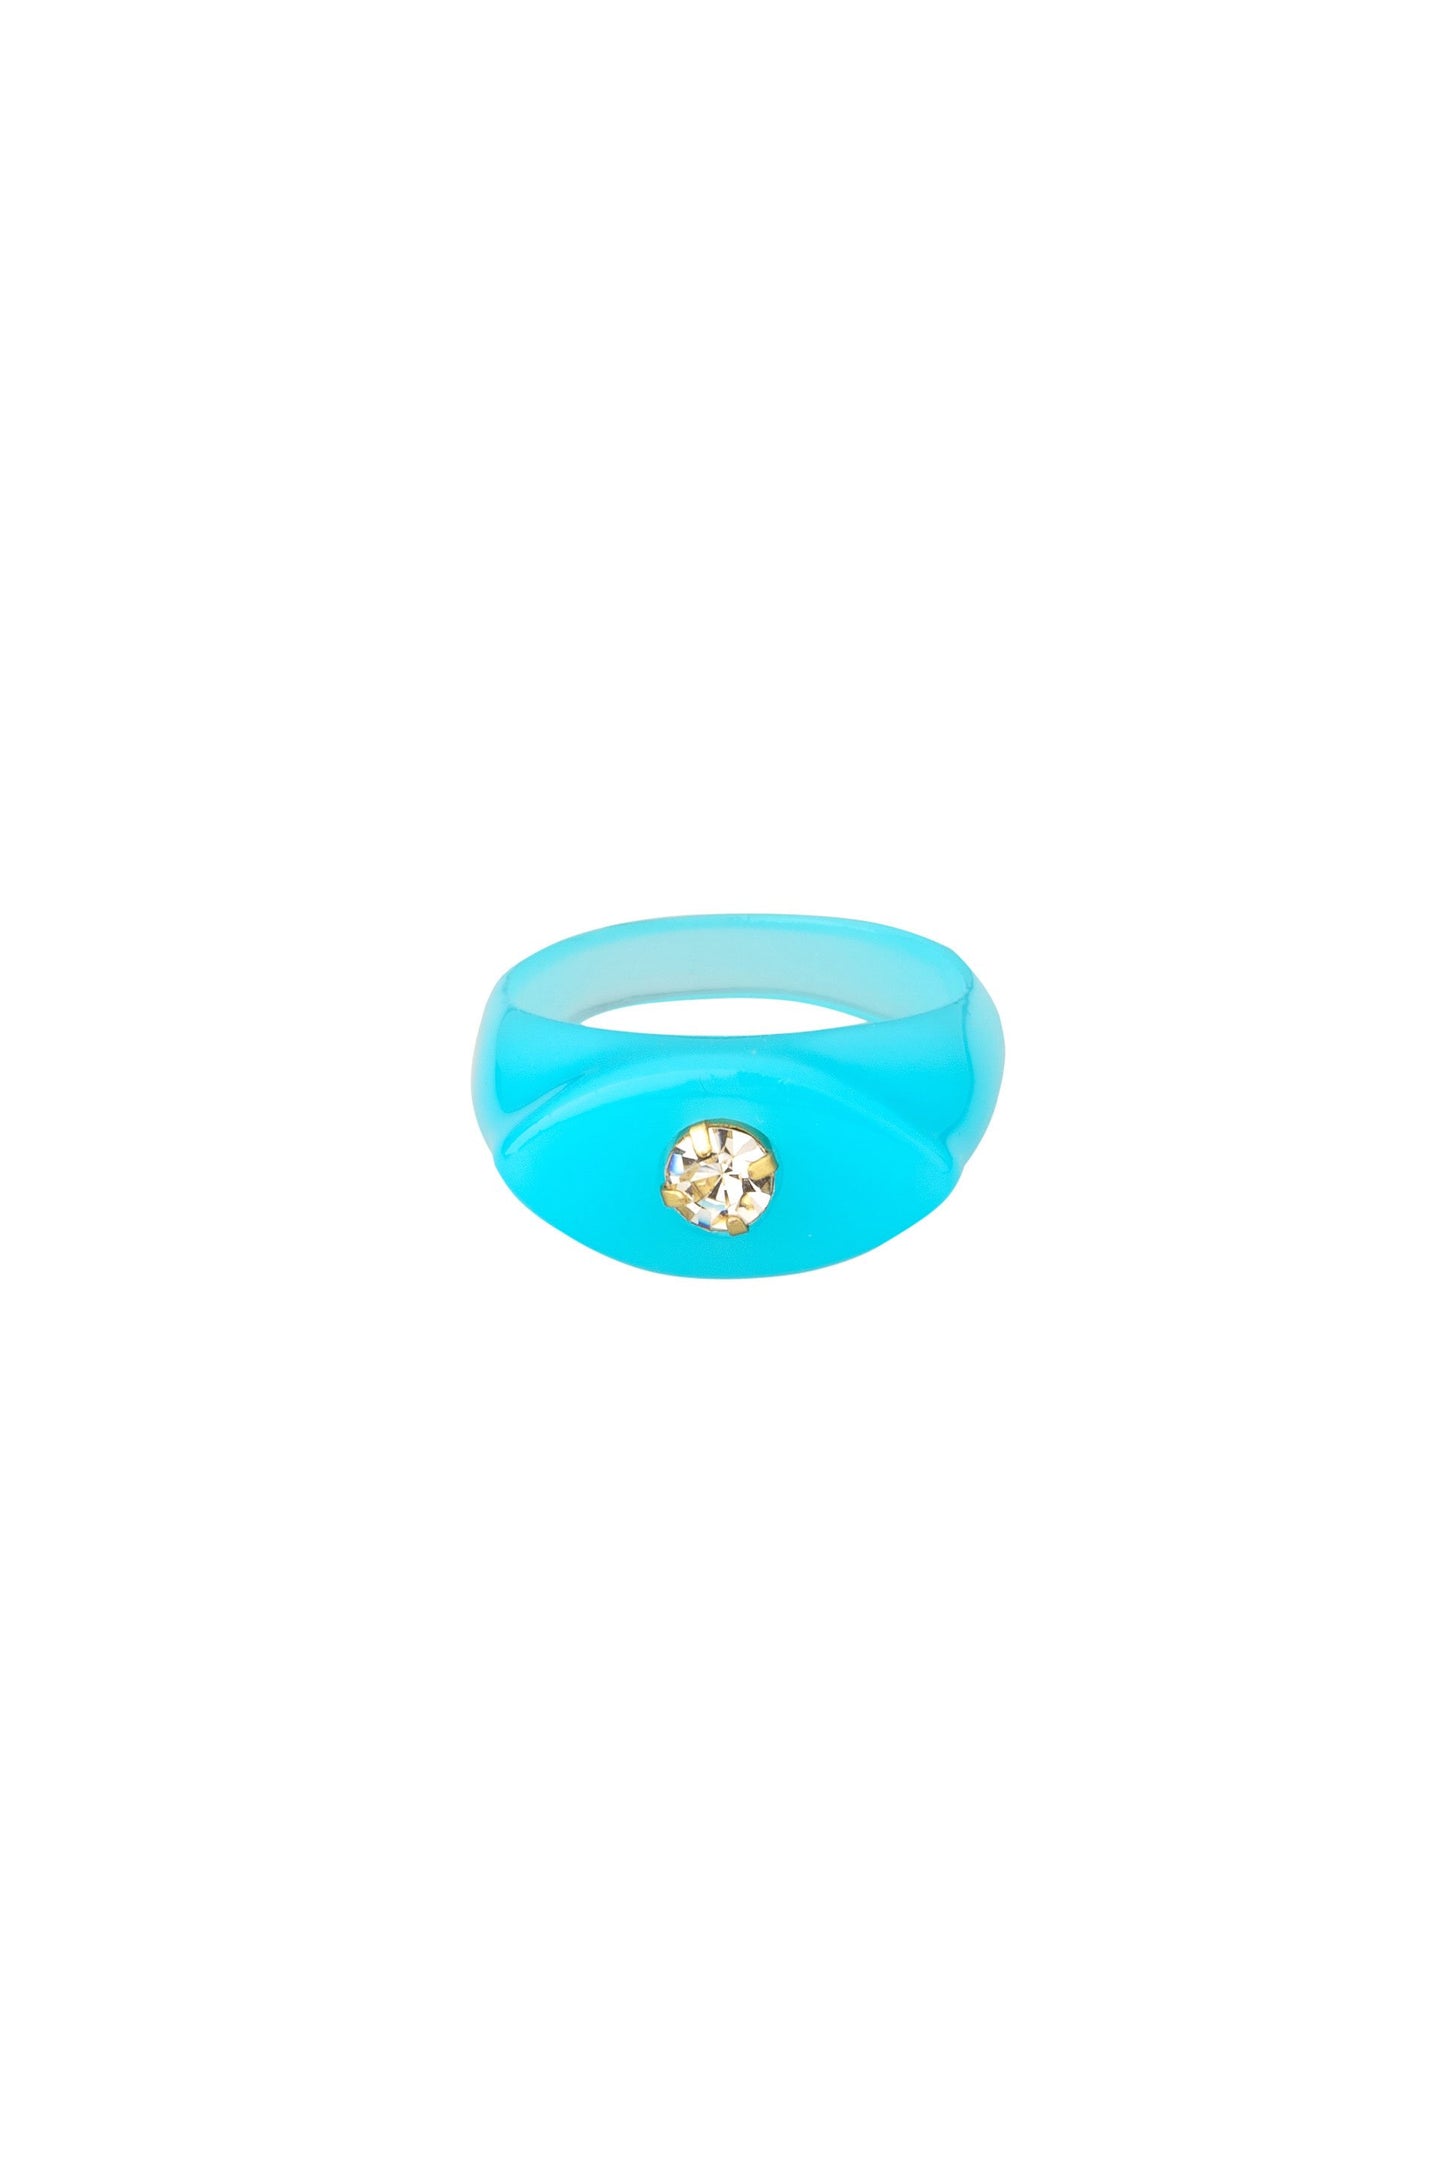 Blue Raspberry Resin Ring with Crystal Accent on white